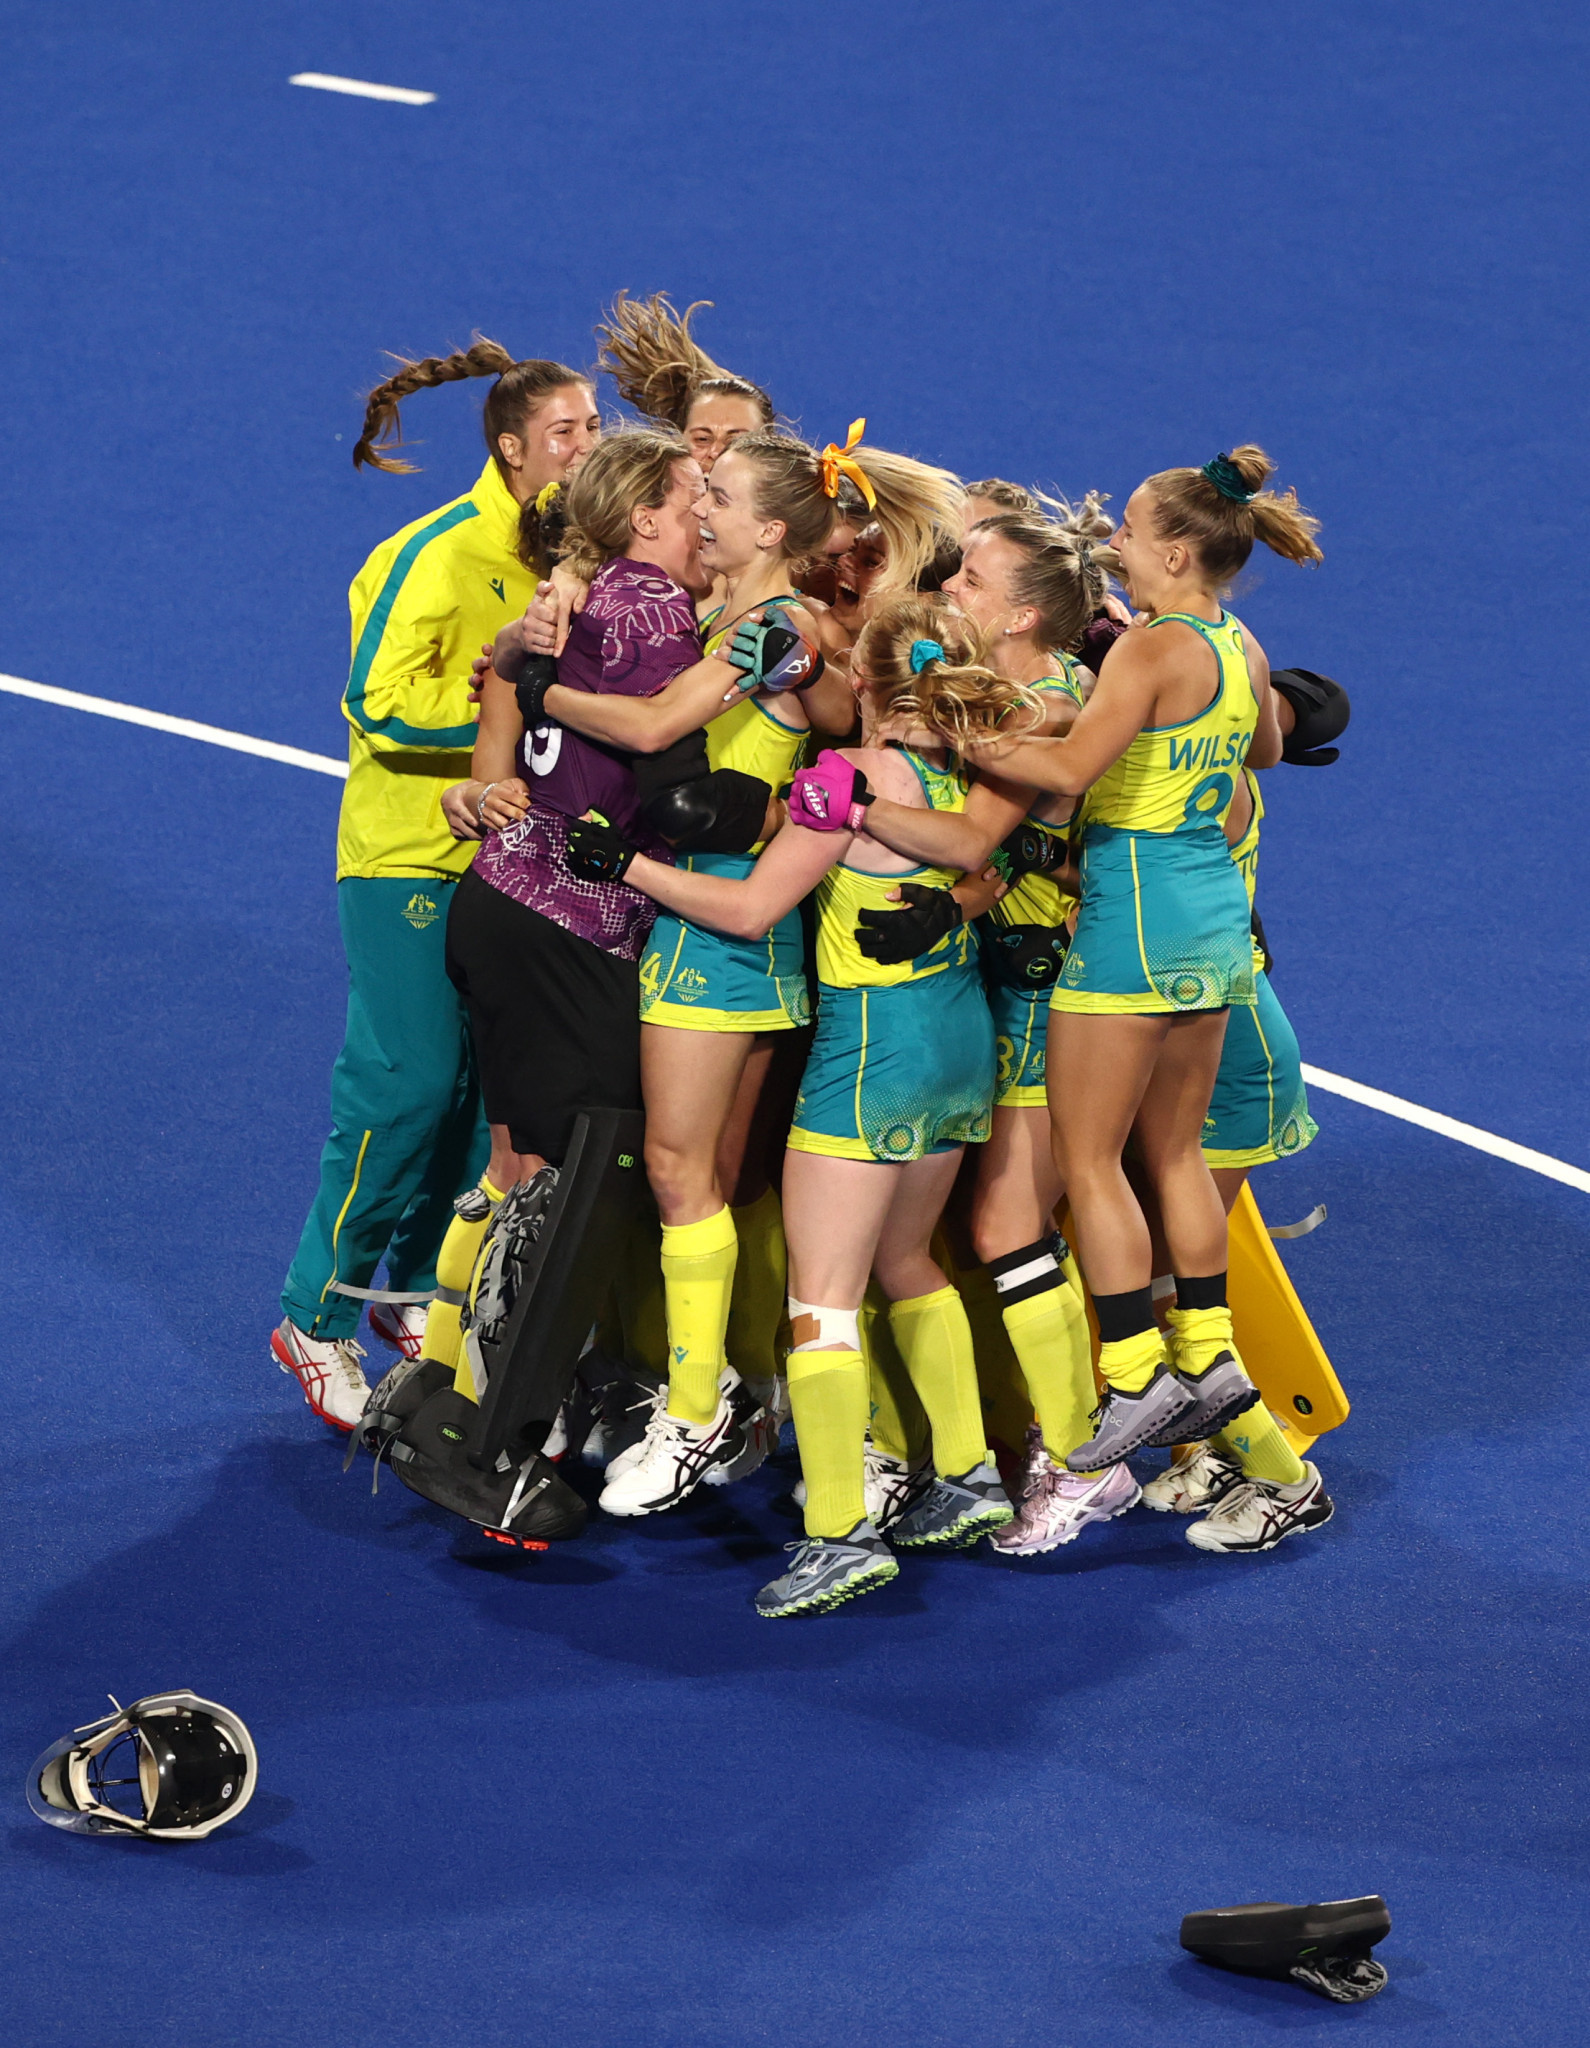 Australia beat India in a shootout to reach the Birmingham 2022 final ©Getty Images